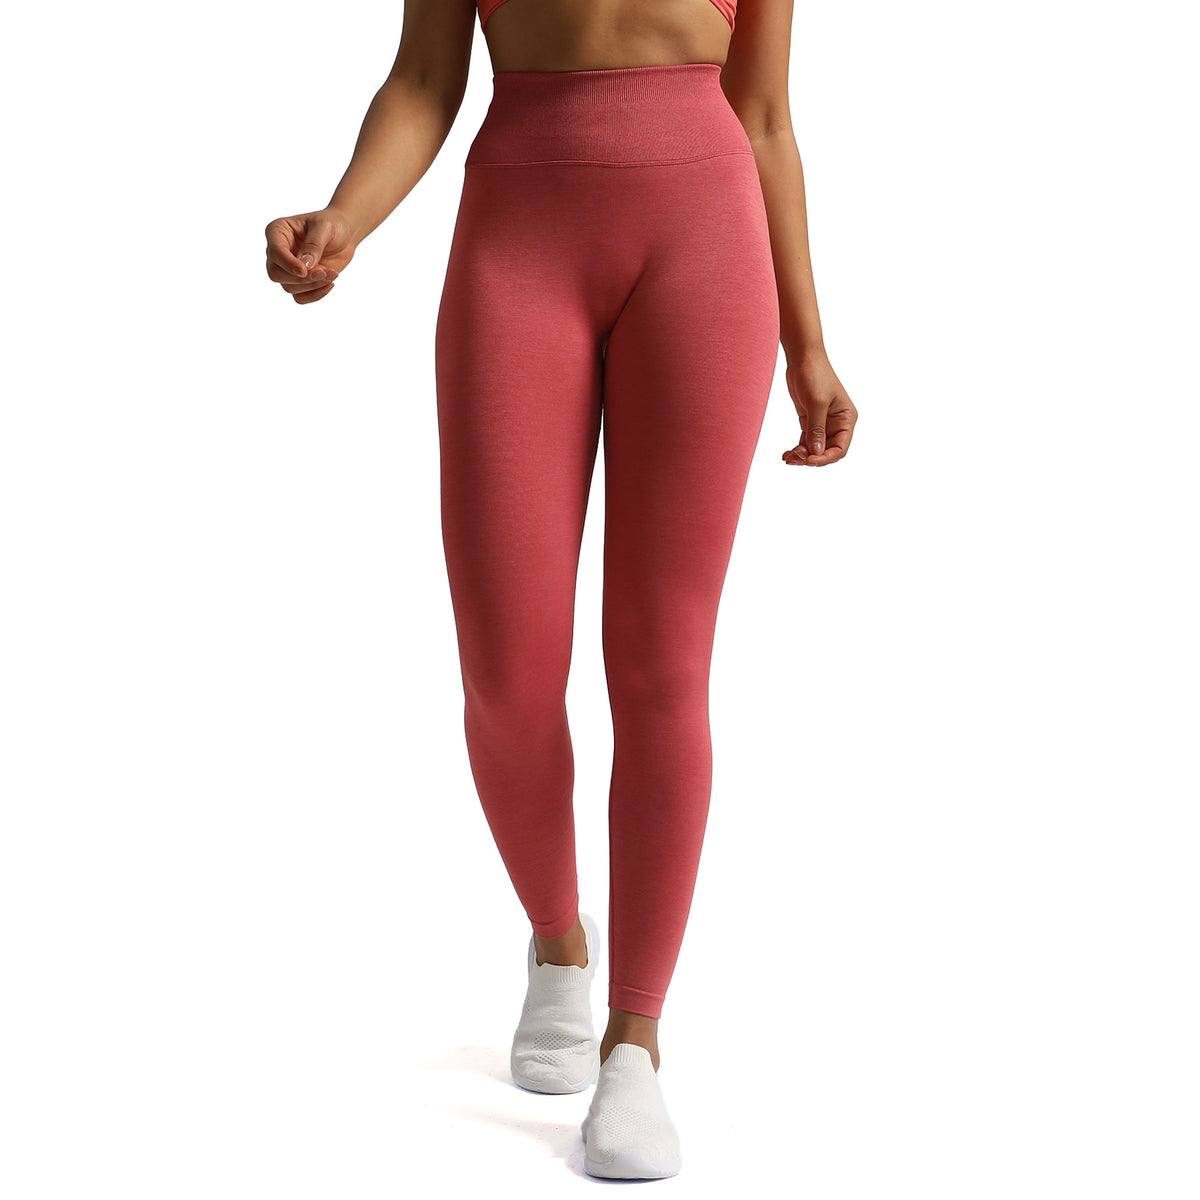 Aoxjox Workout Seamless Leggings for Women High Waisted Exercise Athletic  Gym Fitness Yoga Lexi Lined Leggings (Baton Red/Mauve, Large) at   Women's Clothing store